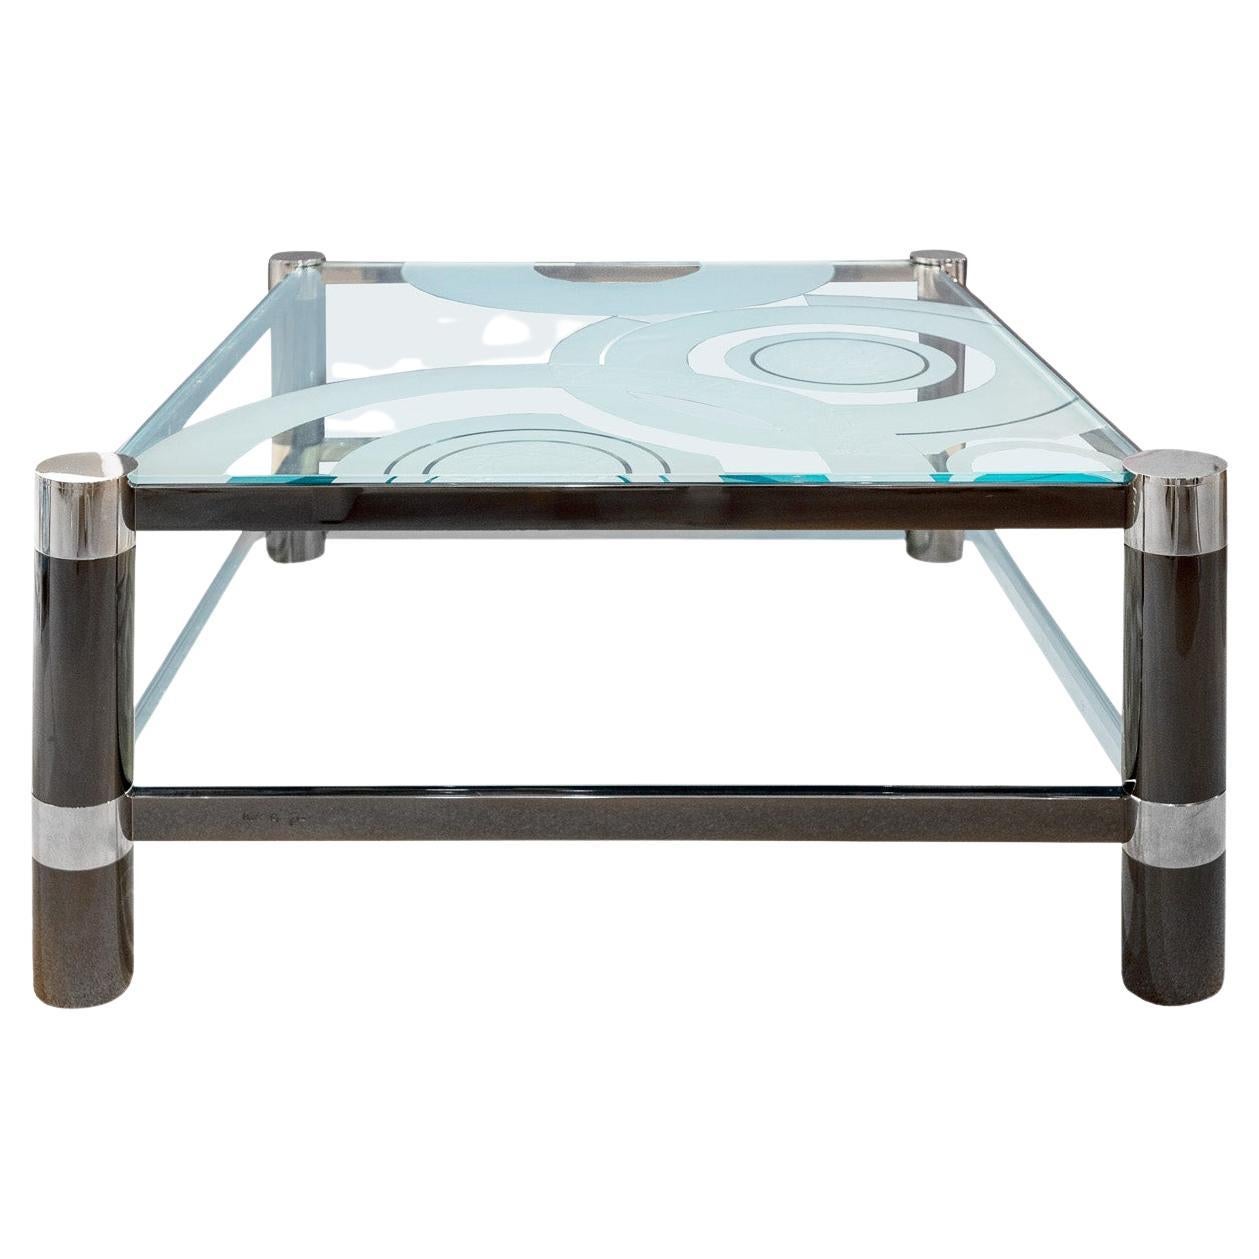 Karl Springer "Round Leg Coffee Table" with Artisan Glass Top, 1980s, 'Signed'